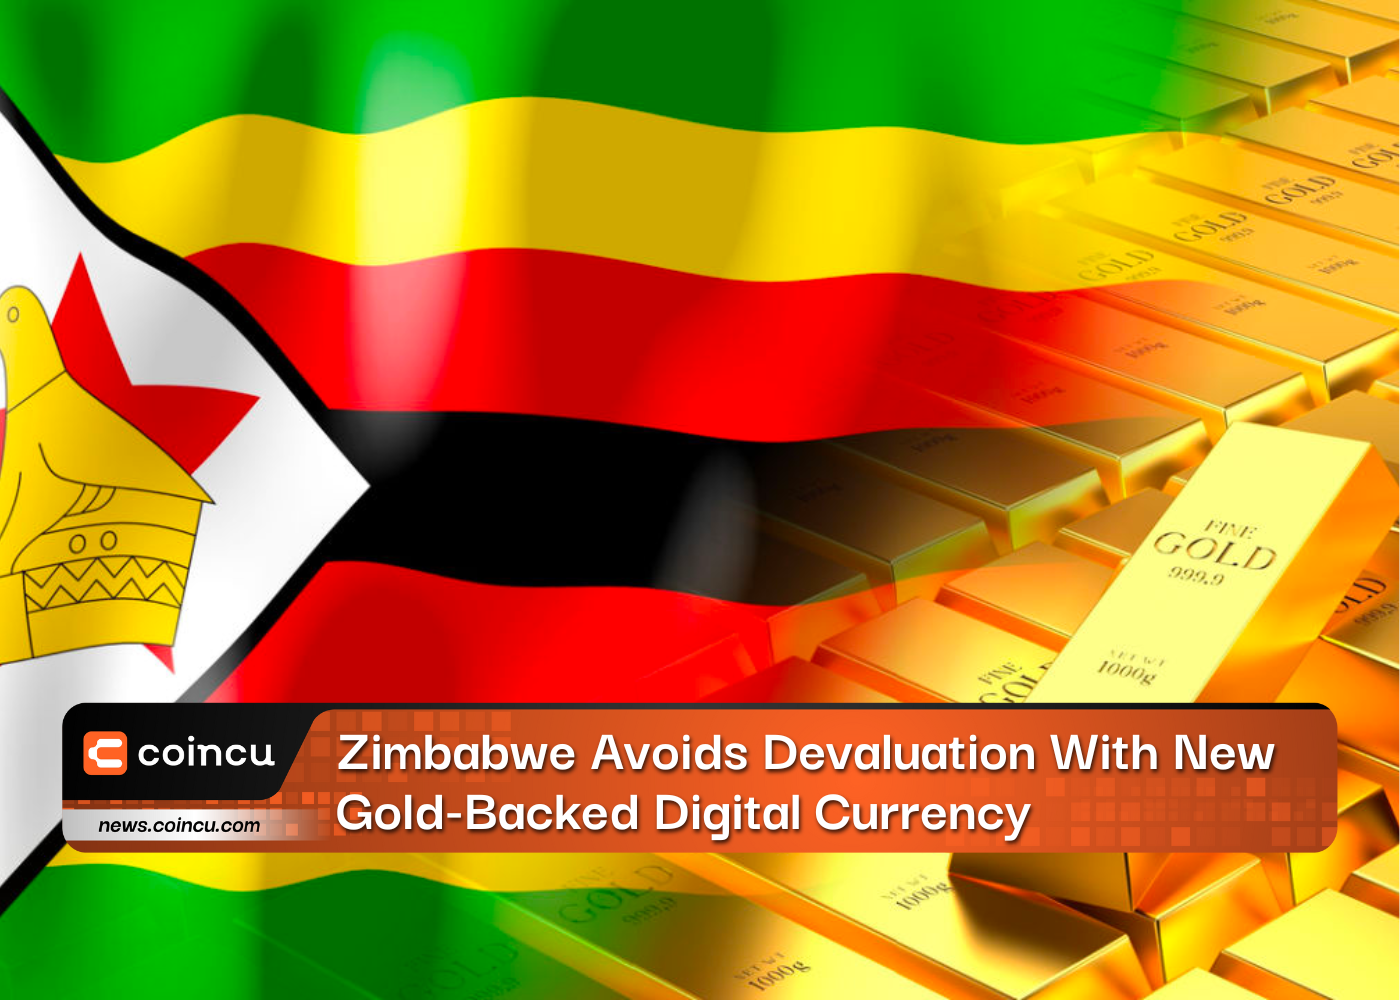 Zimbabwe Avoids Devaluation With New Gold-Backed Digital Currency